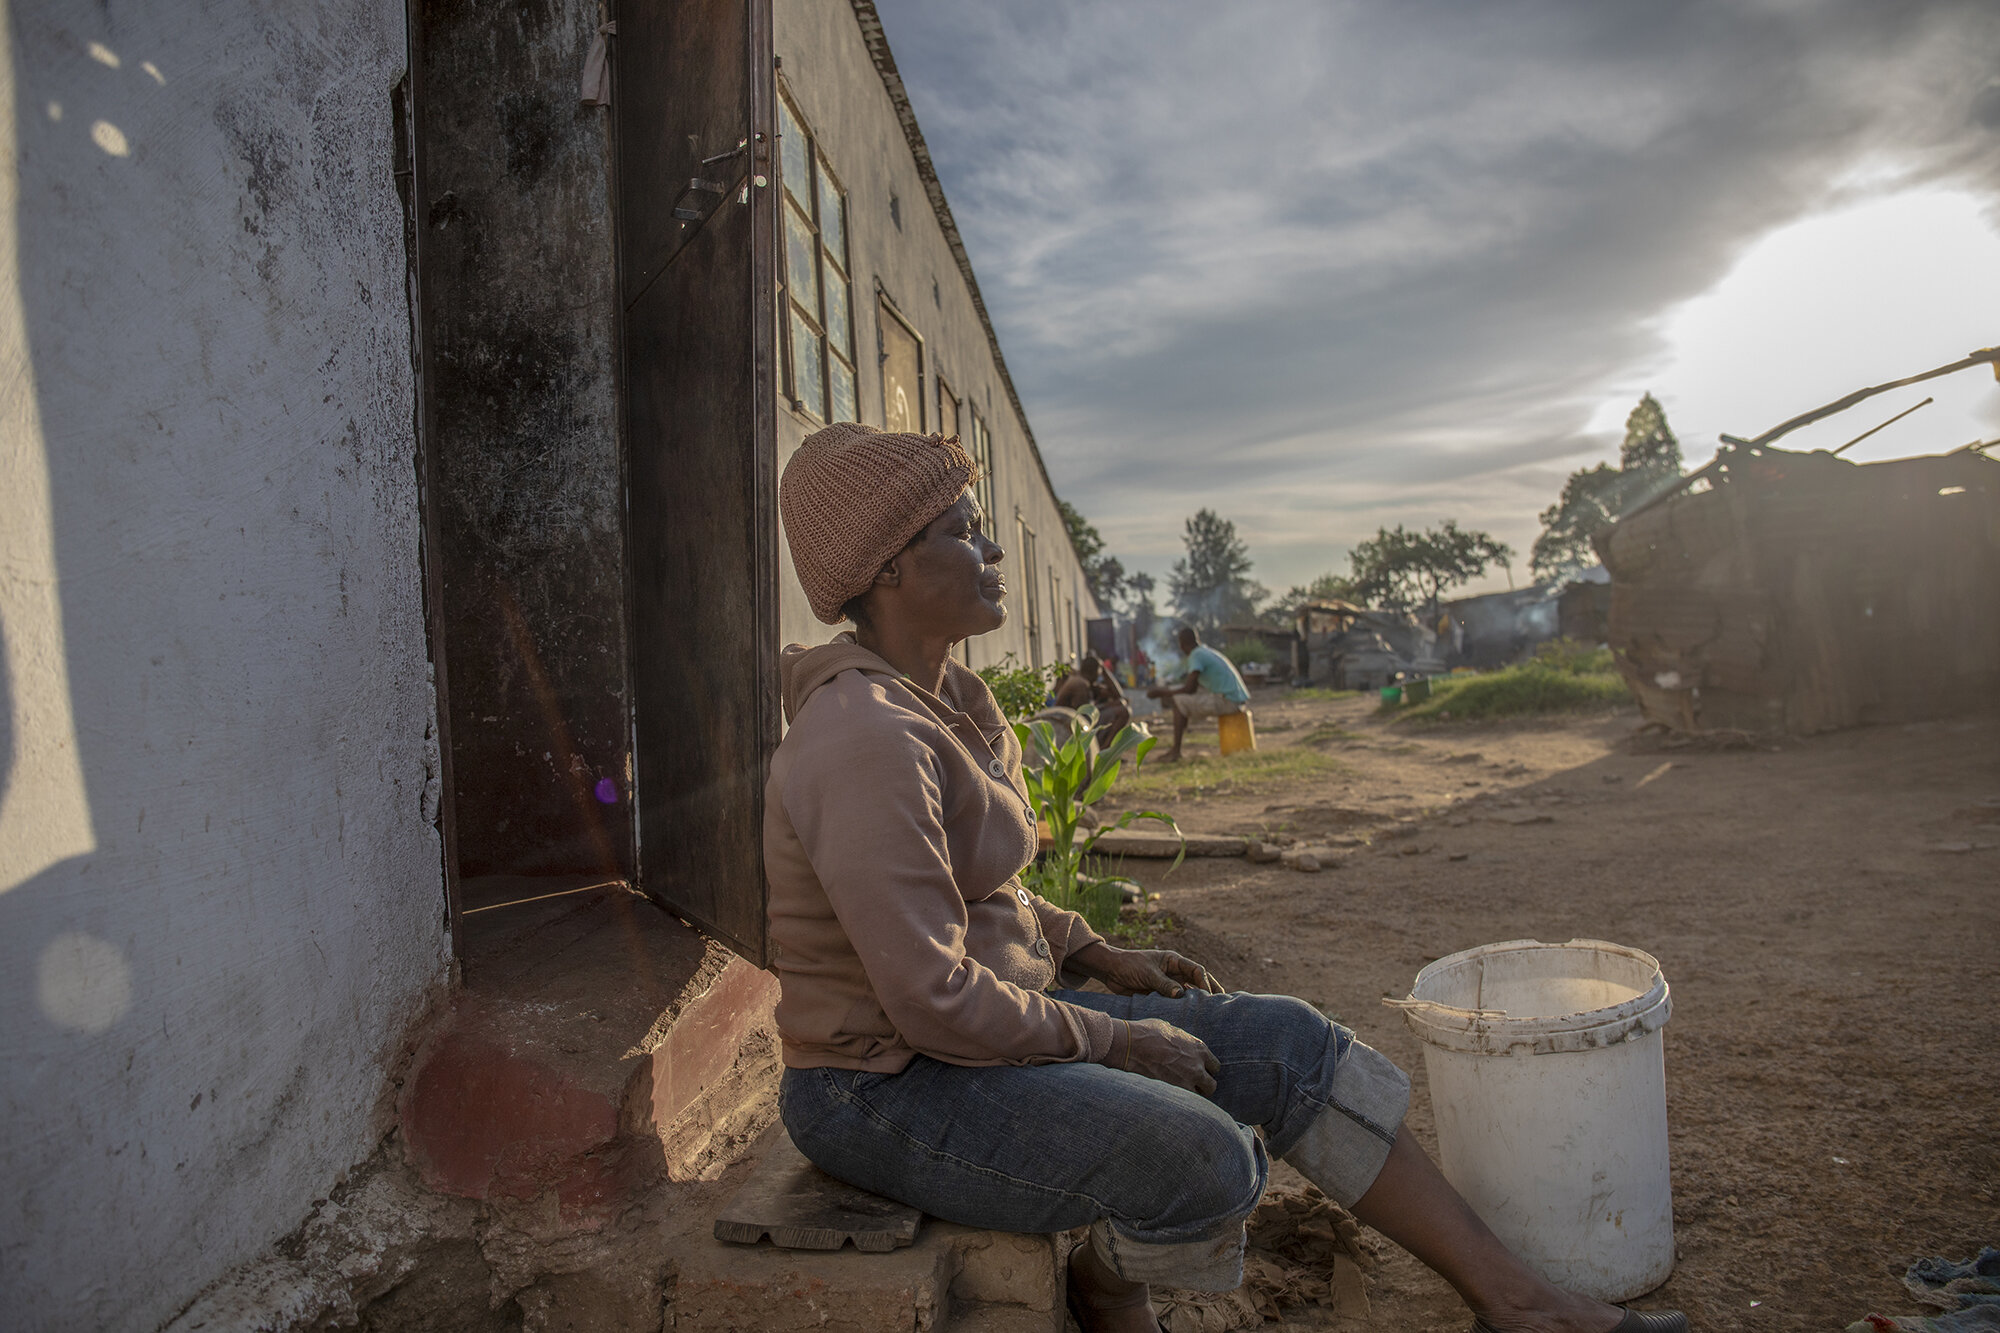  October 22, 2018: Roselyn takes a moment to rest at her doorstep after work in the farm compound. She is a single mother of 4 who lives in a one-roomed house. Growing up she was a Jehovah’s Witness and wanted to work at the church offices and at som